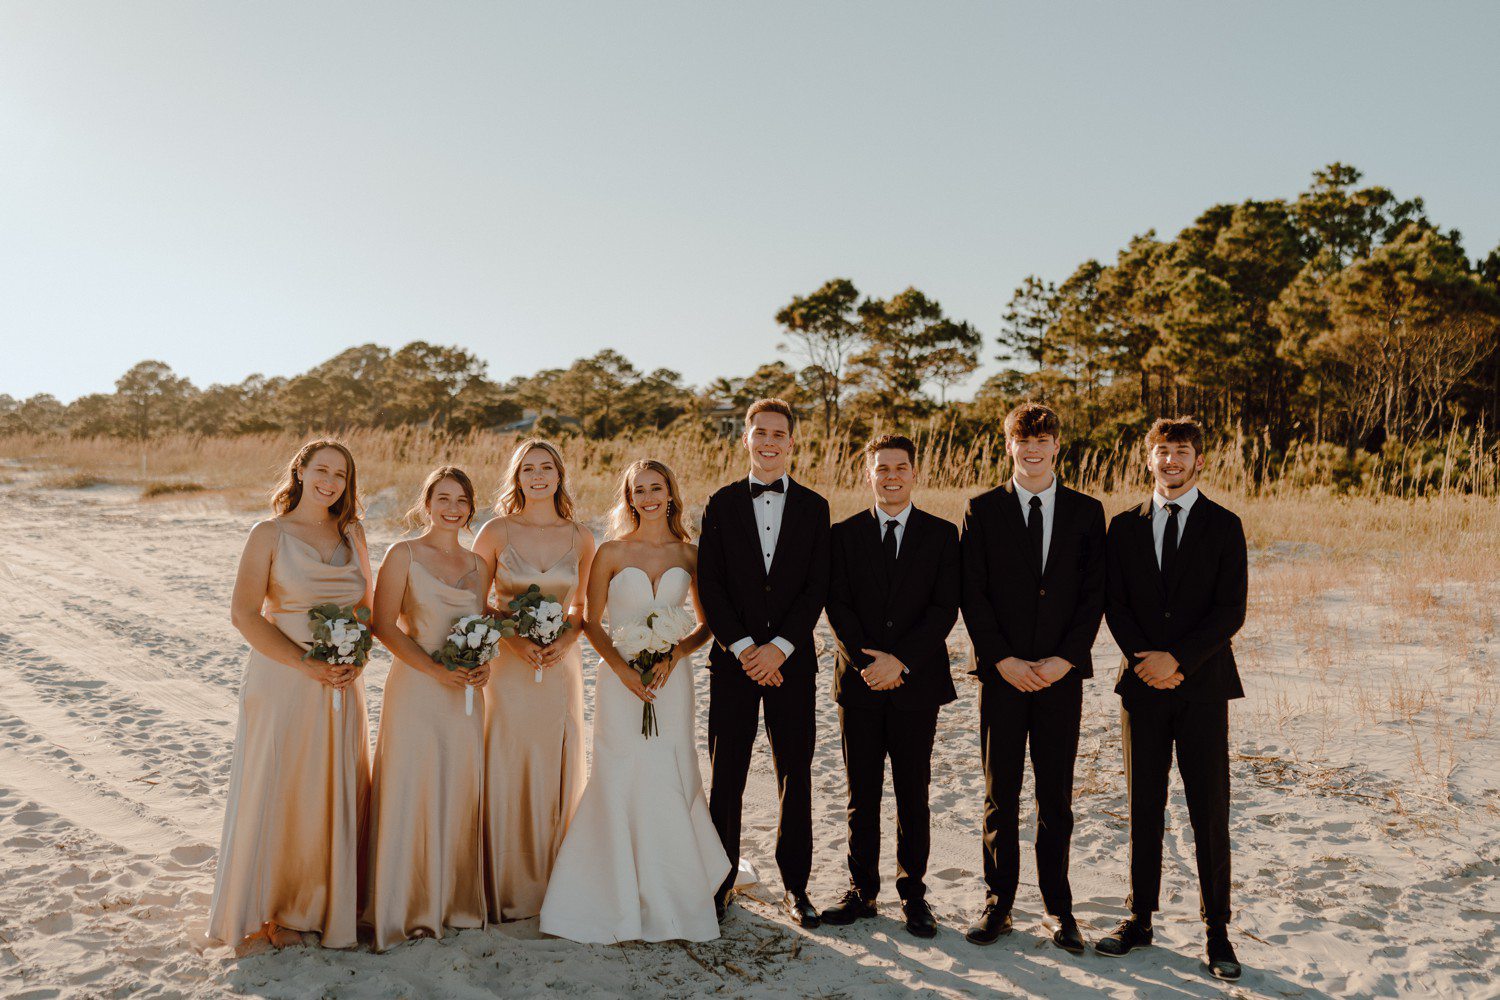 Wedding party photos on beach in champagne bridesmaid dresses